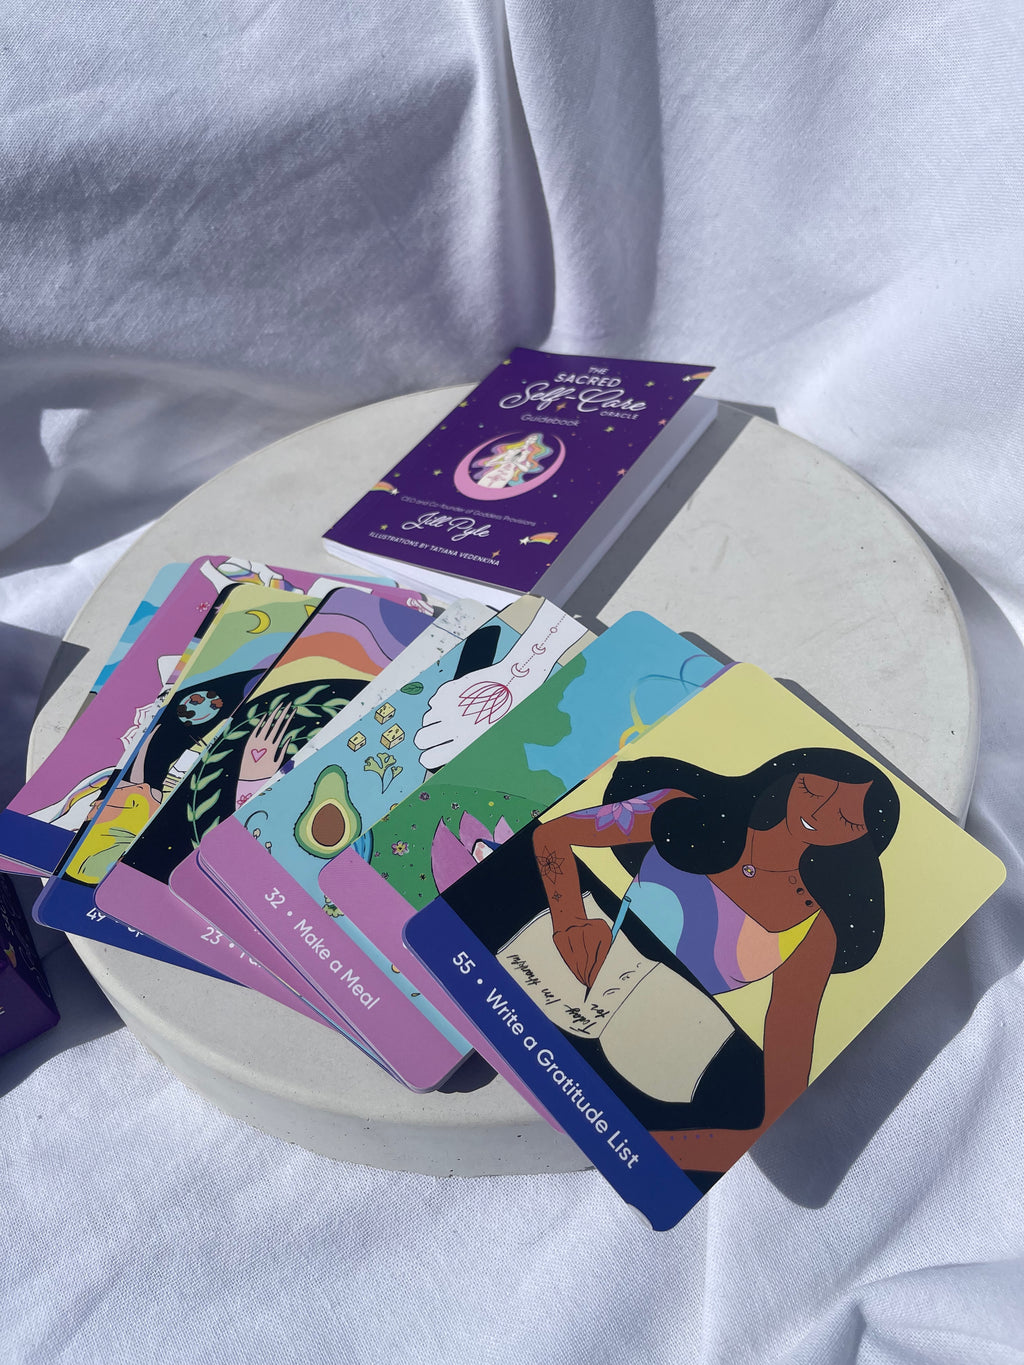 The Sacred Self Care Oracle Cards